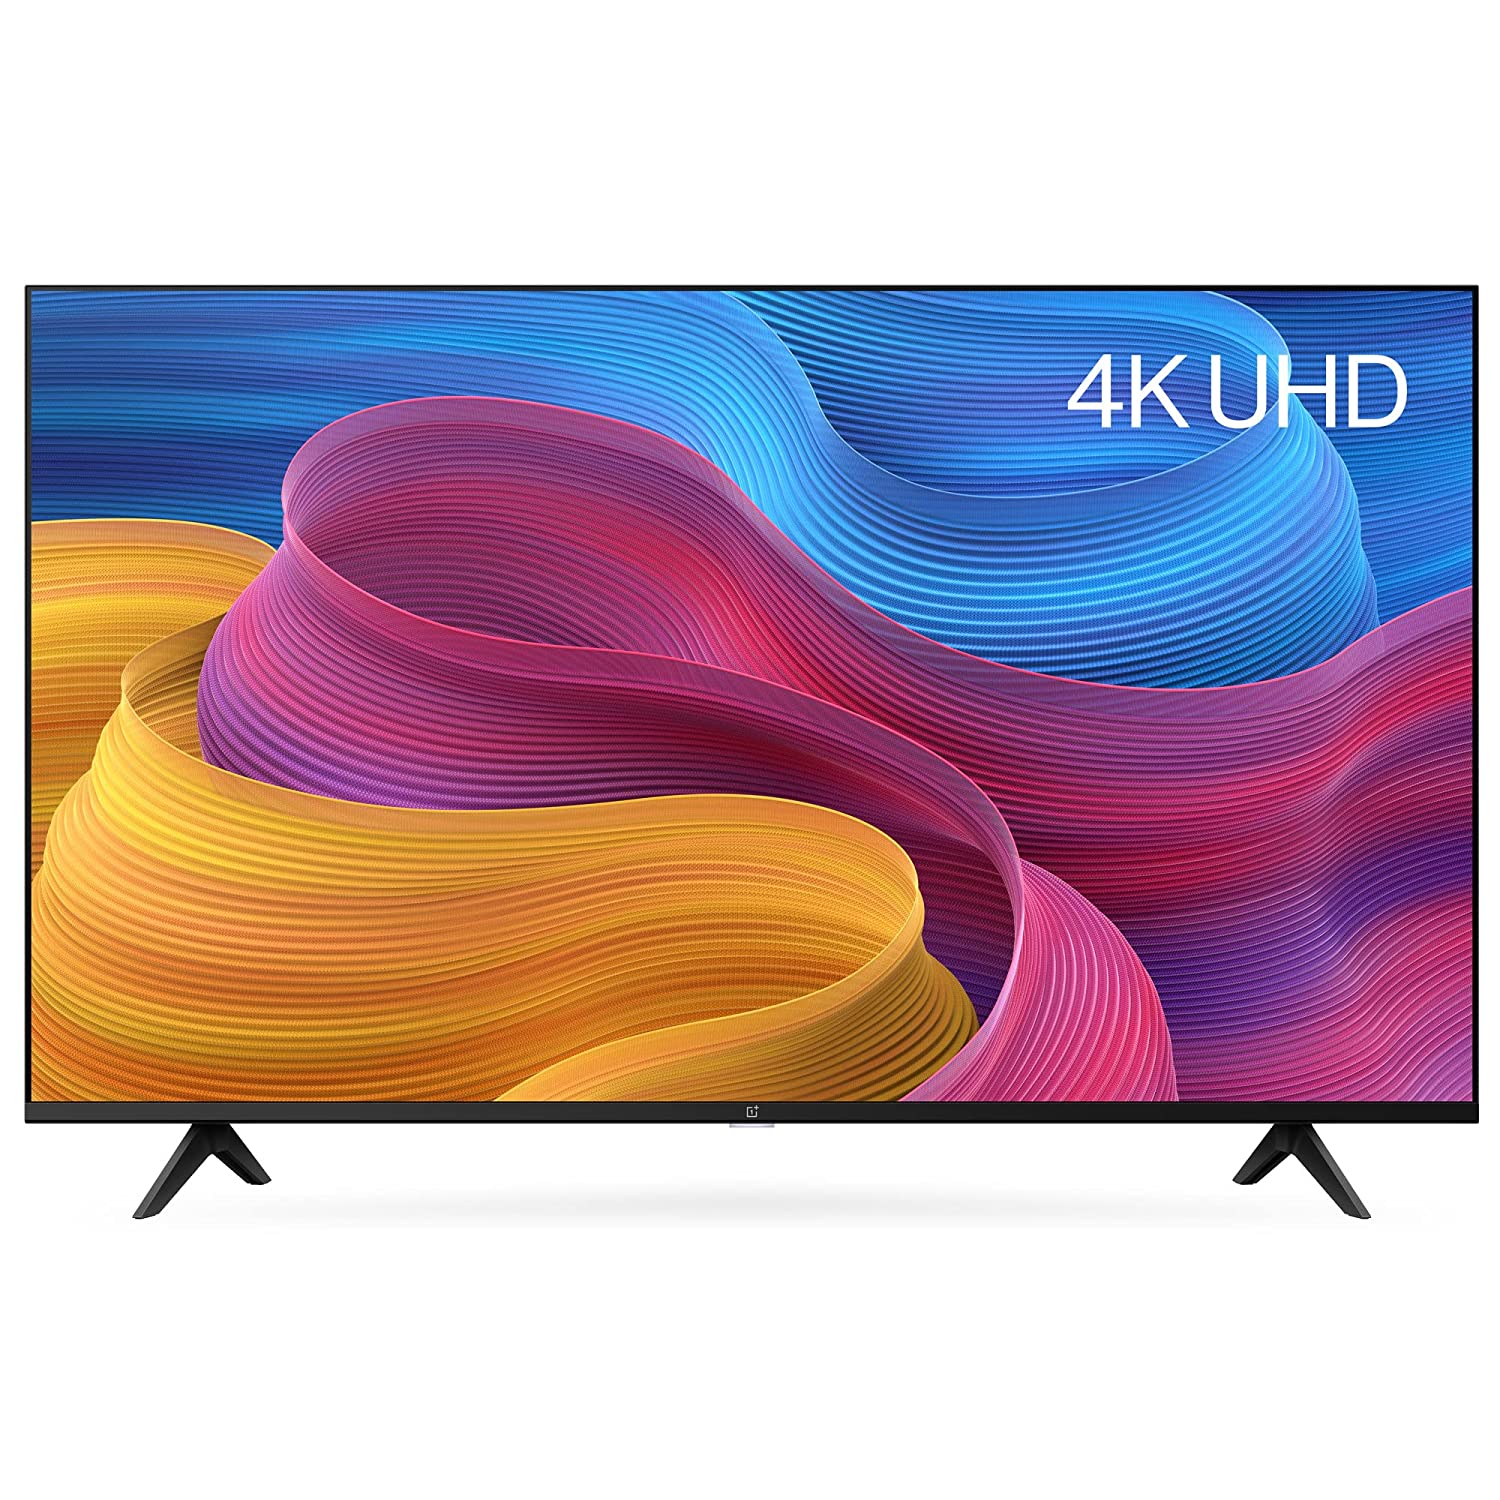 OnePlus 50 inches Y Series 4K Smart LED TV